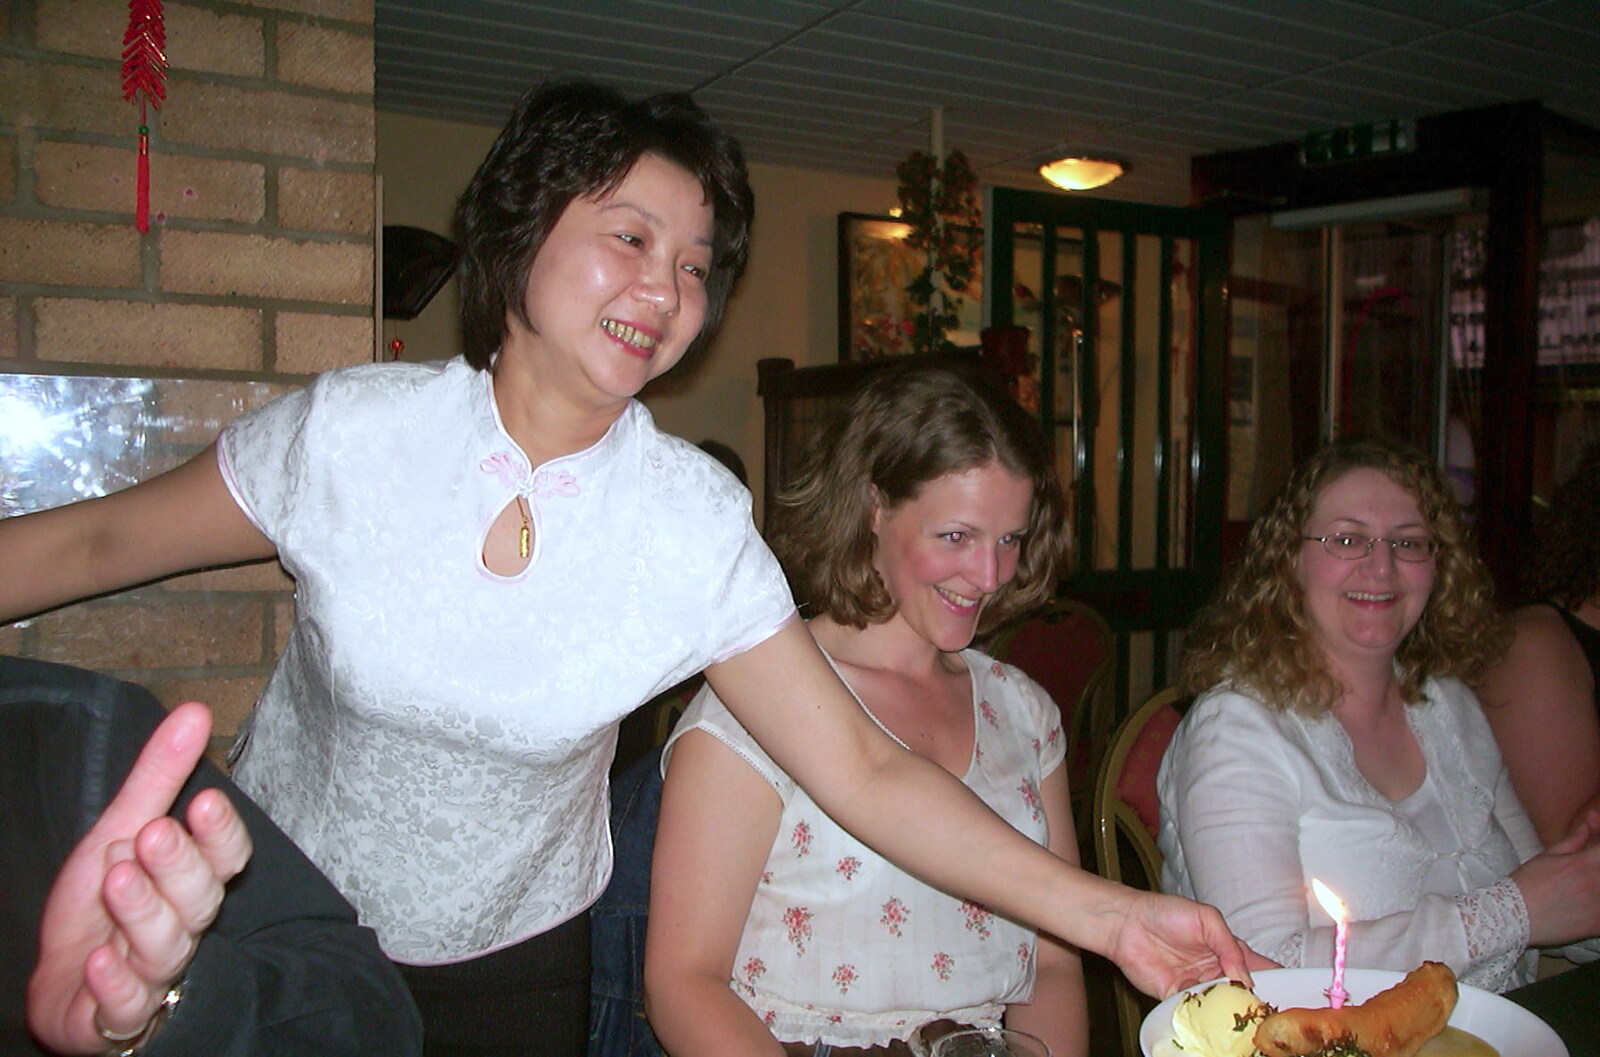 The restaurant owner brings over a novelty dessert from Michelle's 3G Lab Birthday, The Mews, St. Ives, Cambridgeshire - 20th September 2002